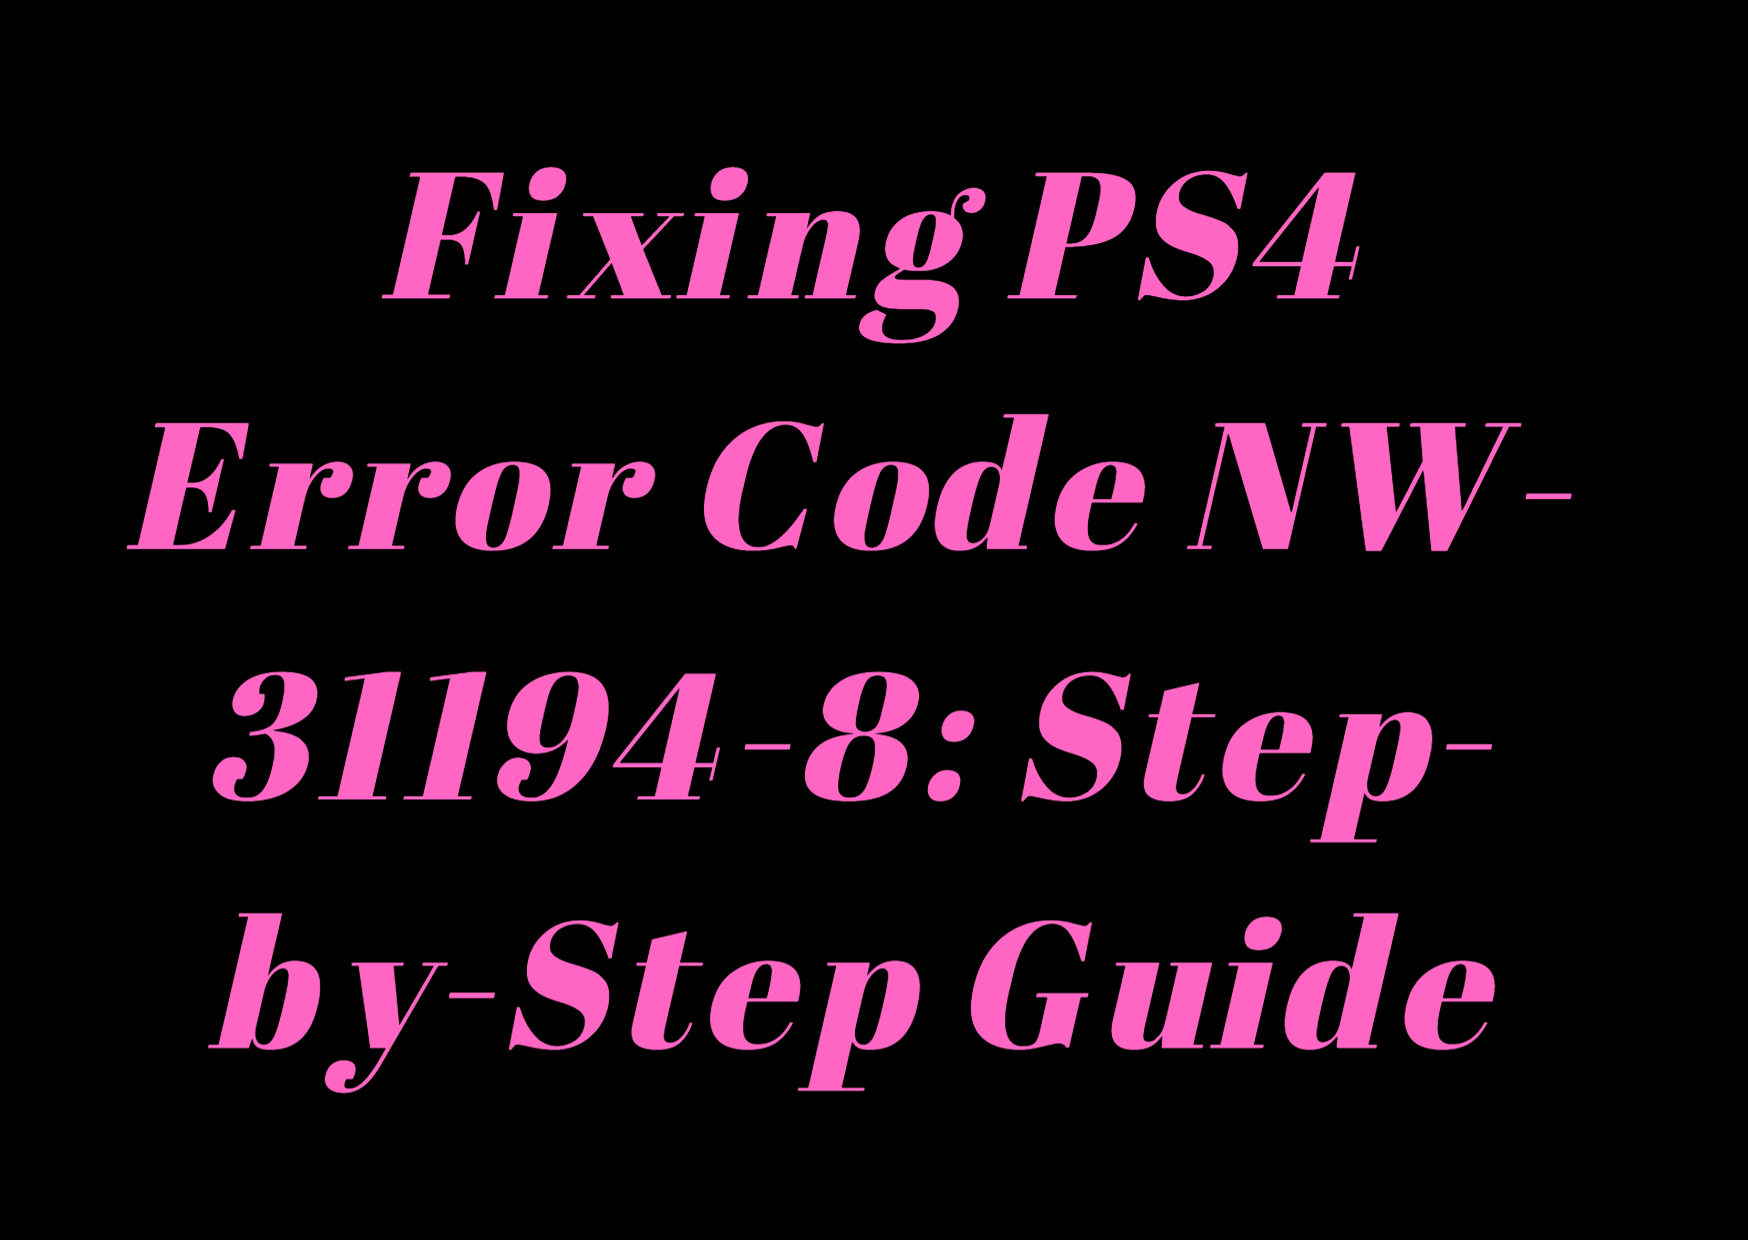 Fixing PS4 Error Code NW-31194-8: Step-by-Step Guide